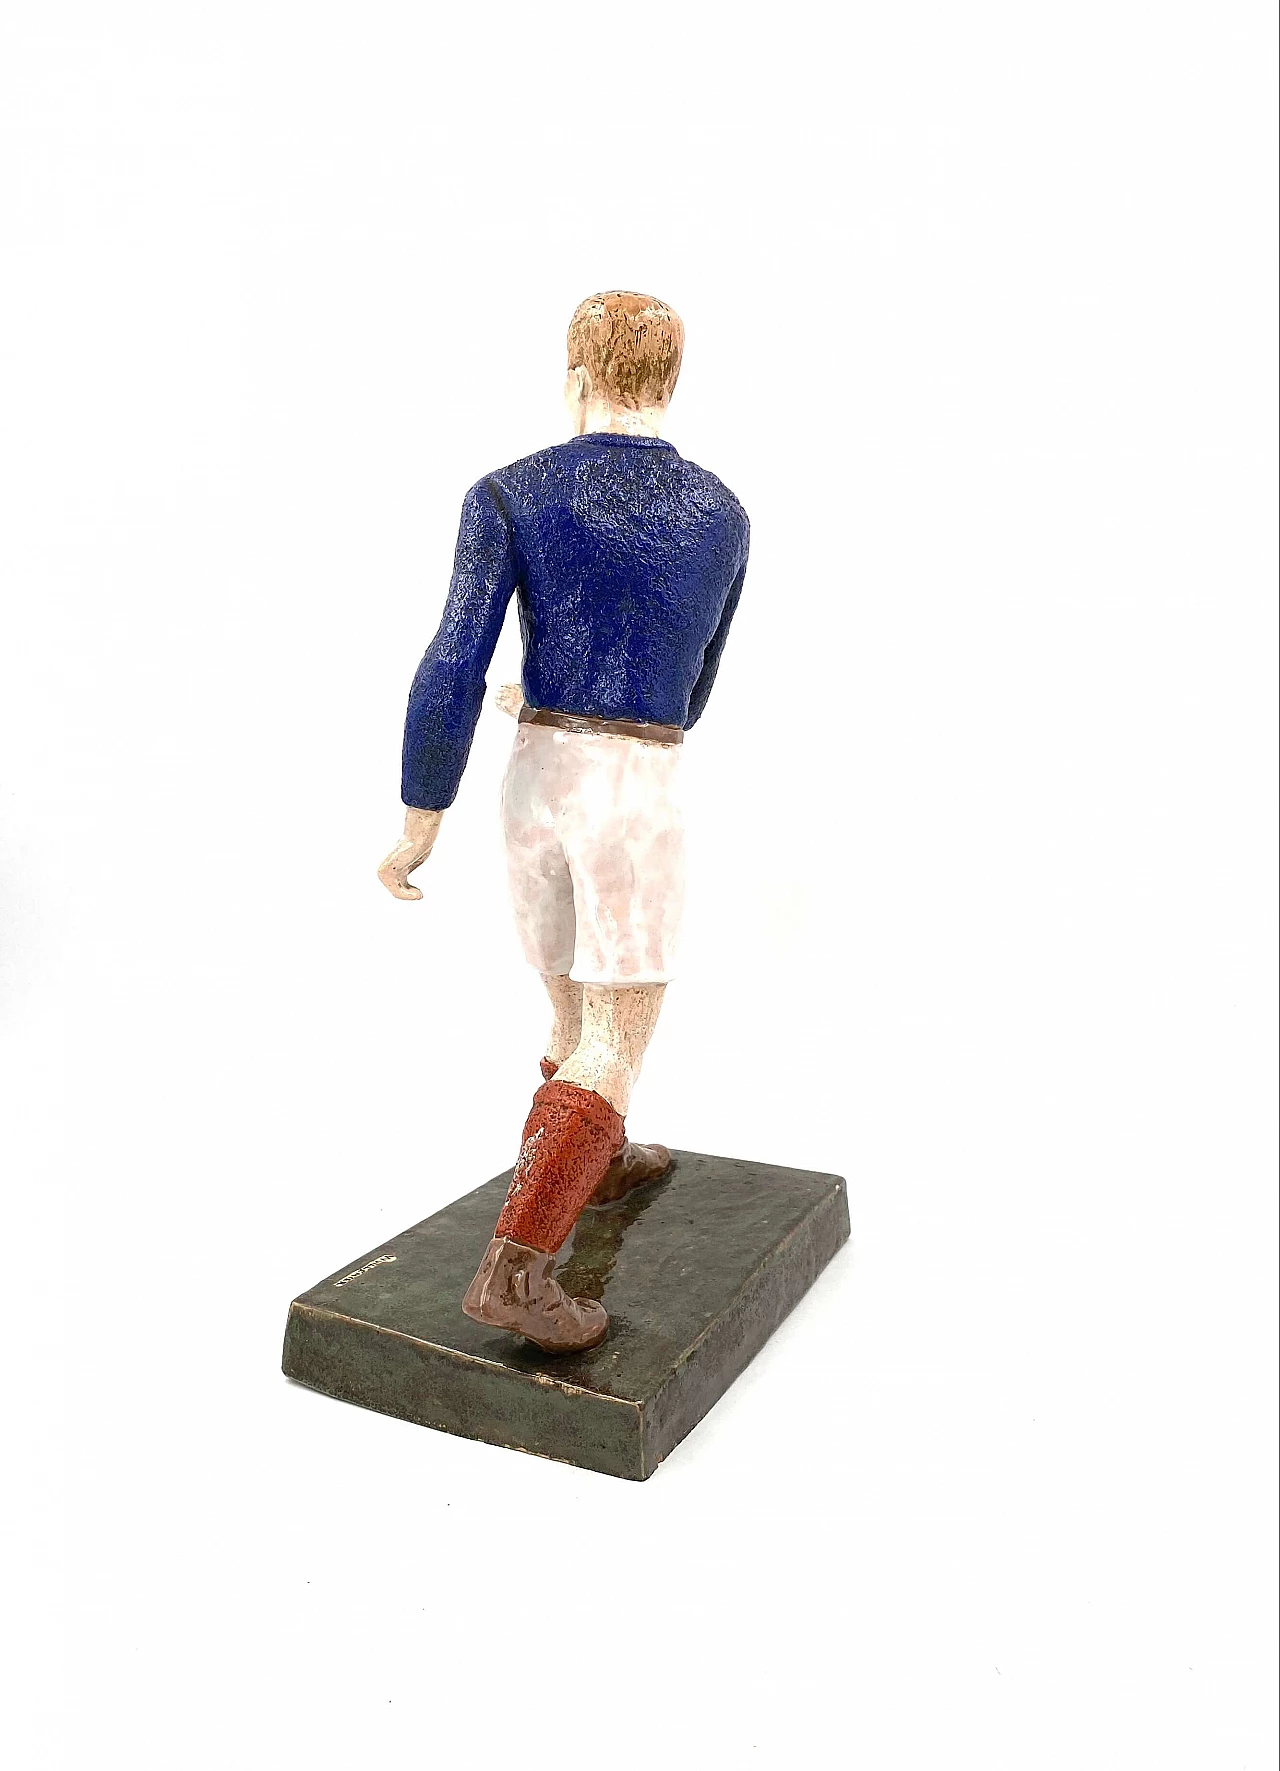 Willy Wuilleumier, scultura Les joueurs de rugby, GAM, Francia, 1940 1277362